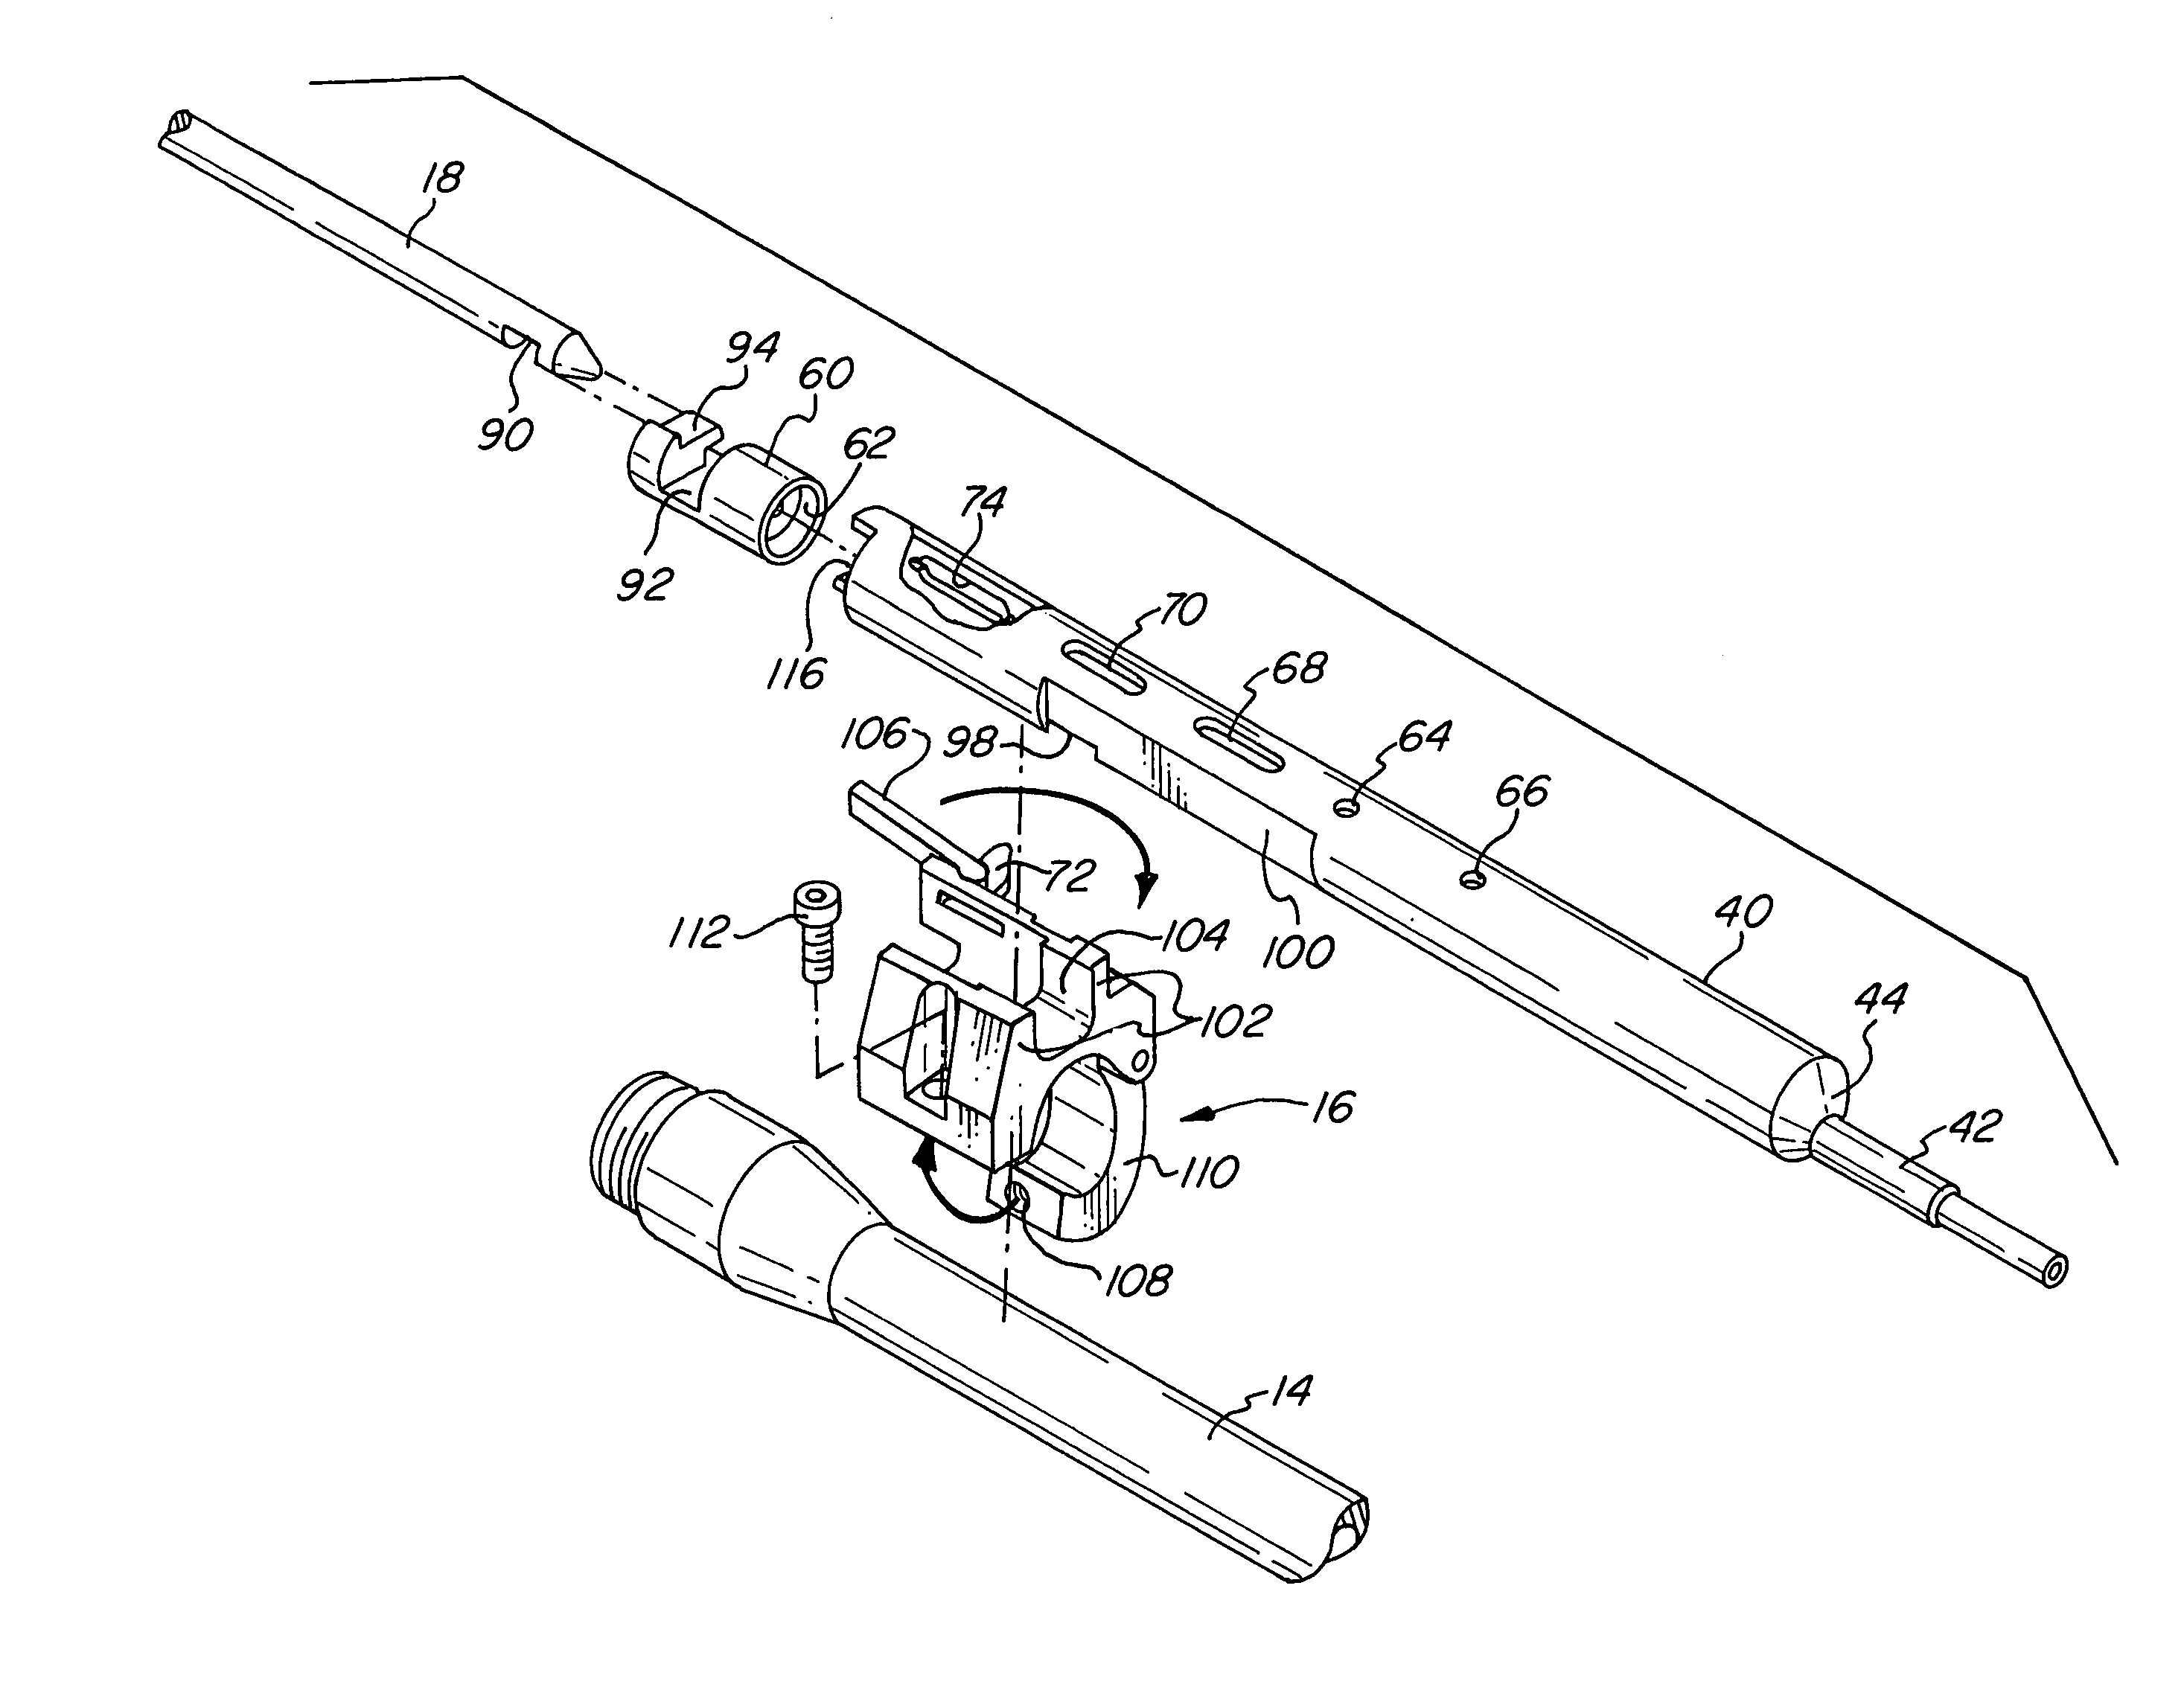 Gas tappet system for a rifle